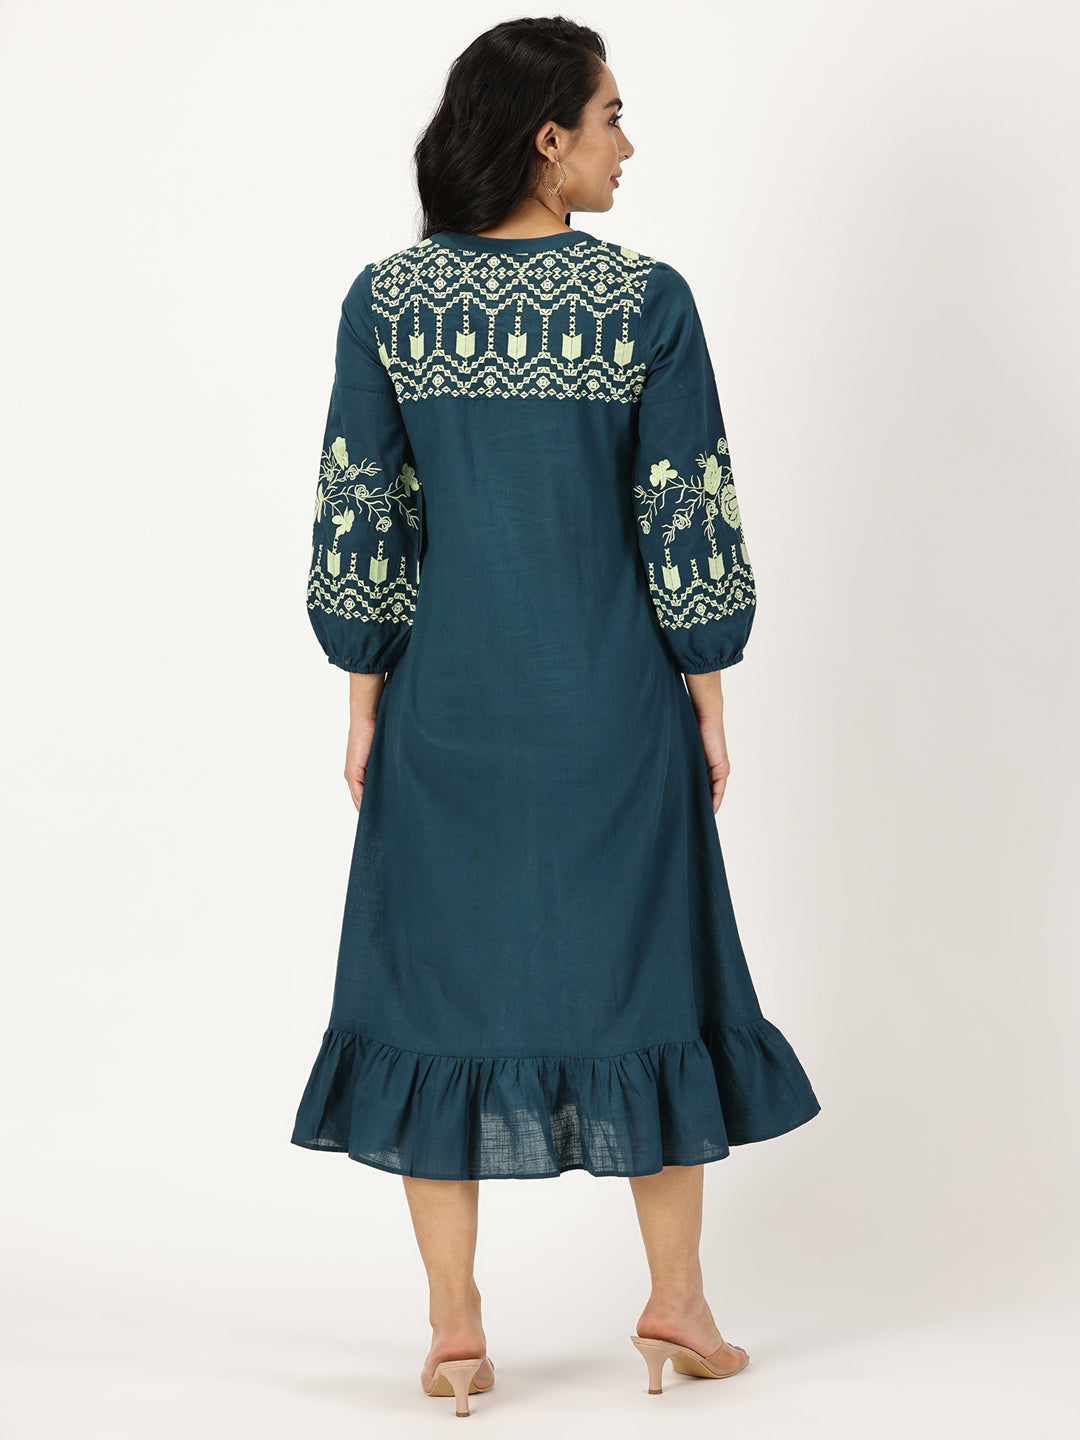 Teal Boho Midi Dress with Embroidered Details